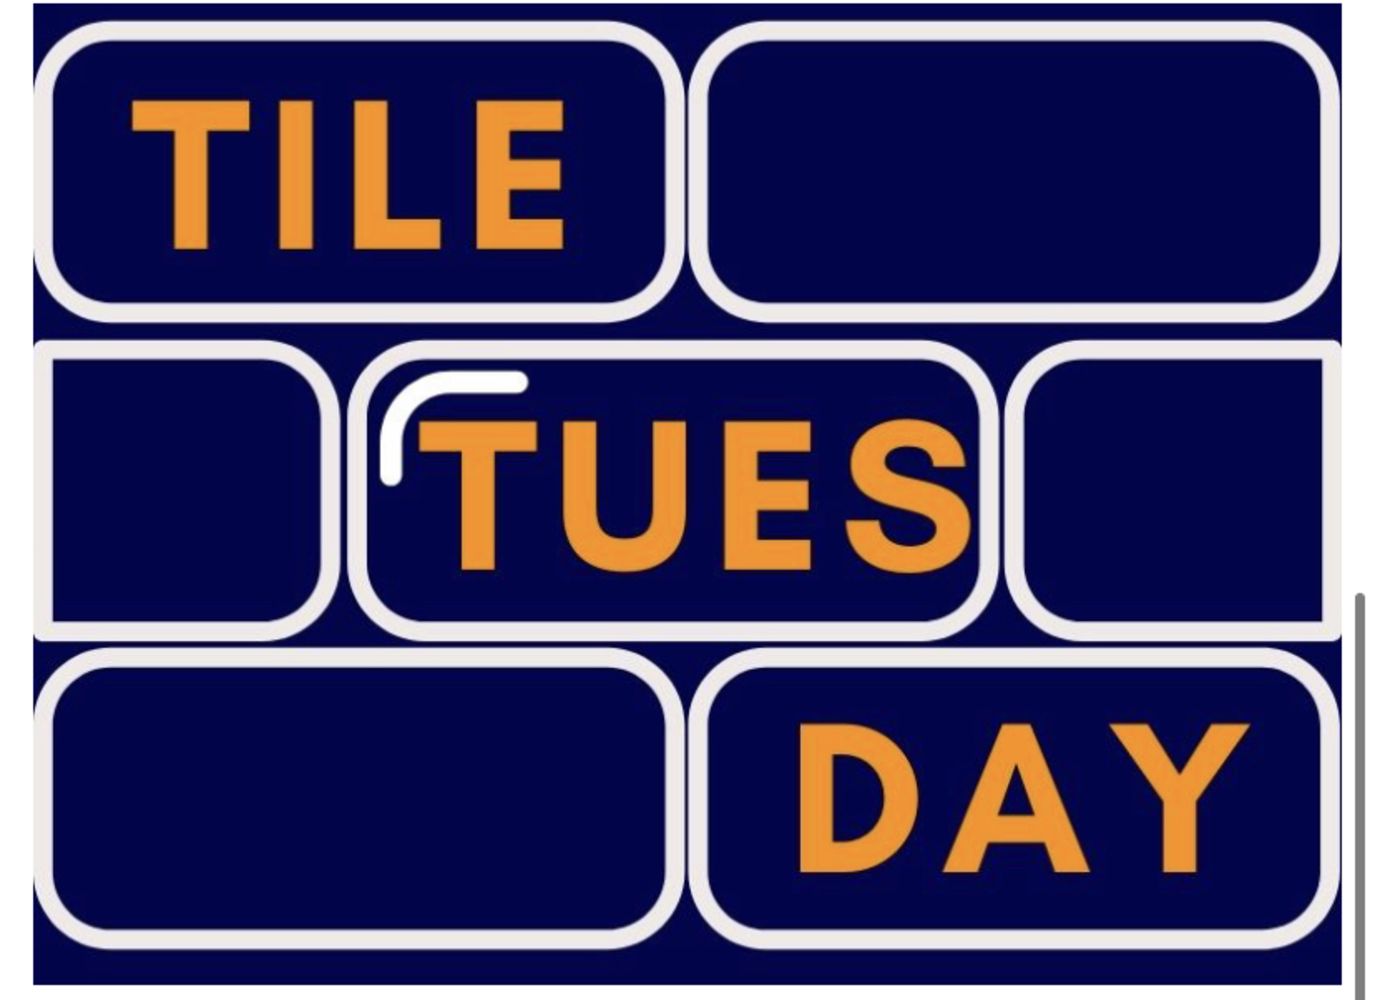 No Reserve - Tile Tuesday - “over £80k worth of tiles – Sourced from Johnsons Tiles” - 8th June 2021